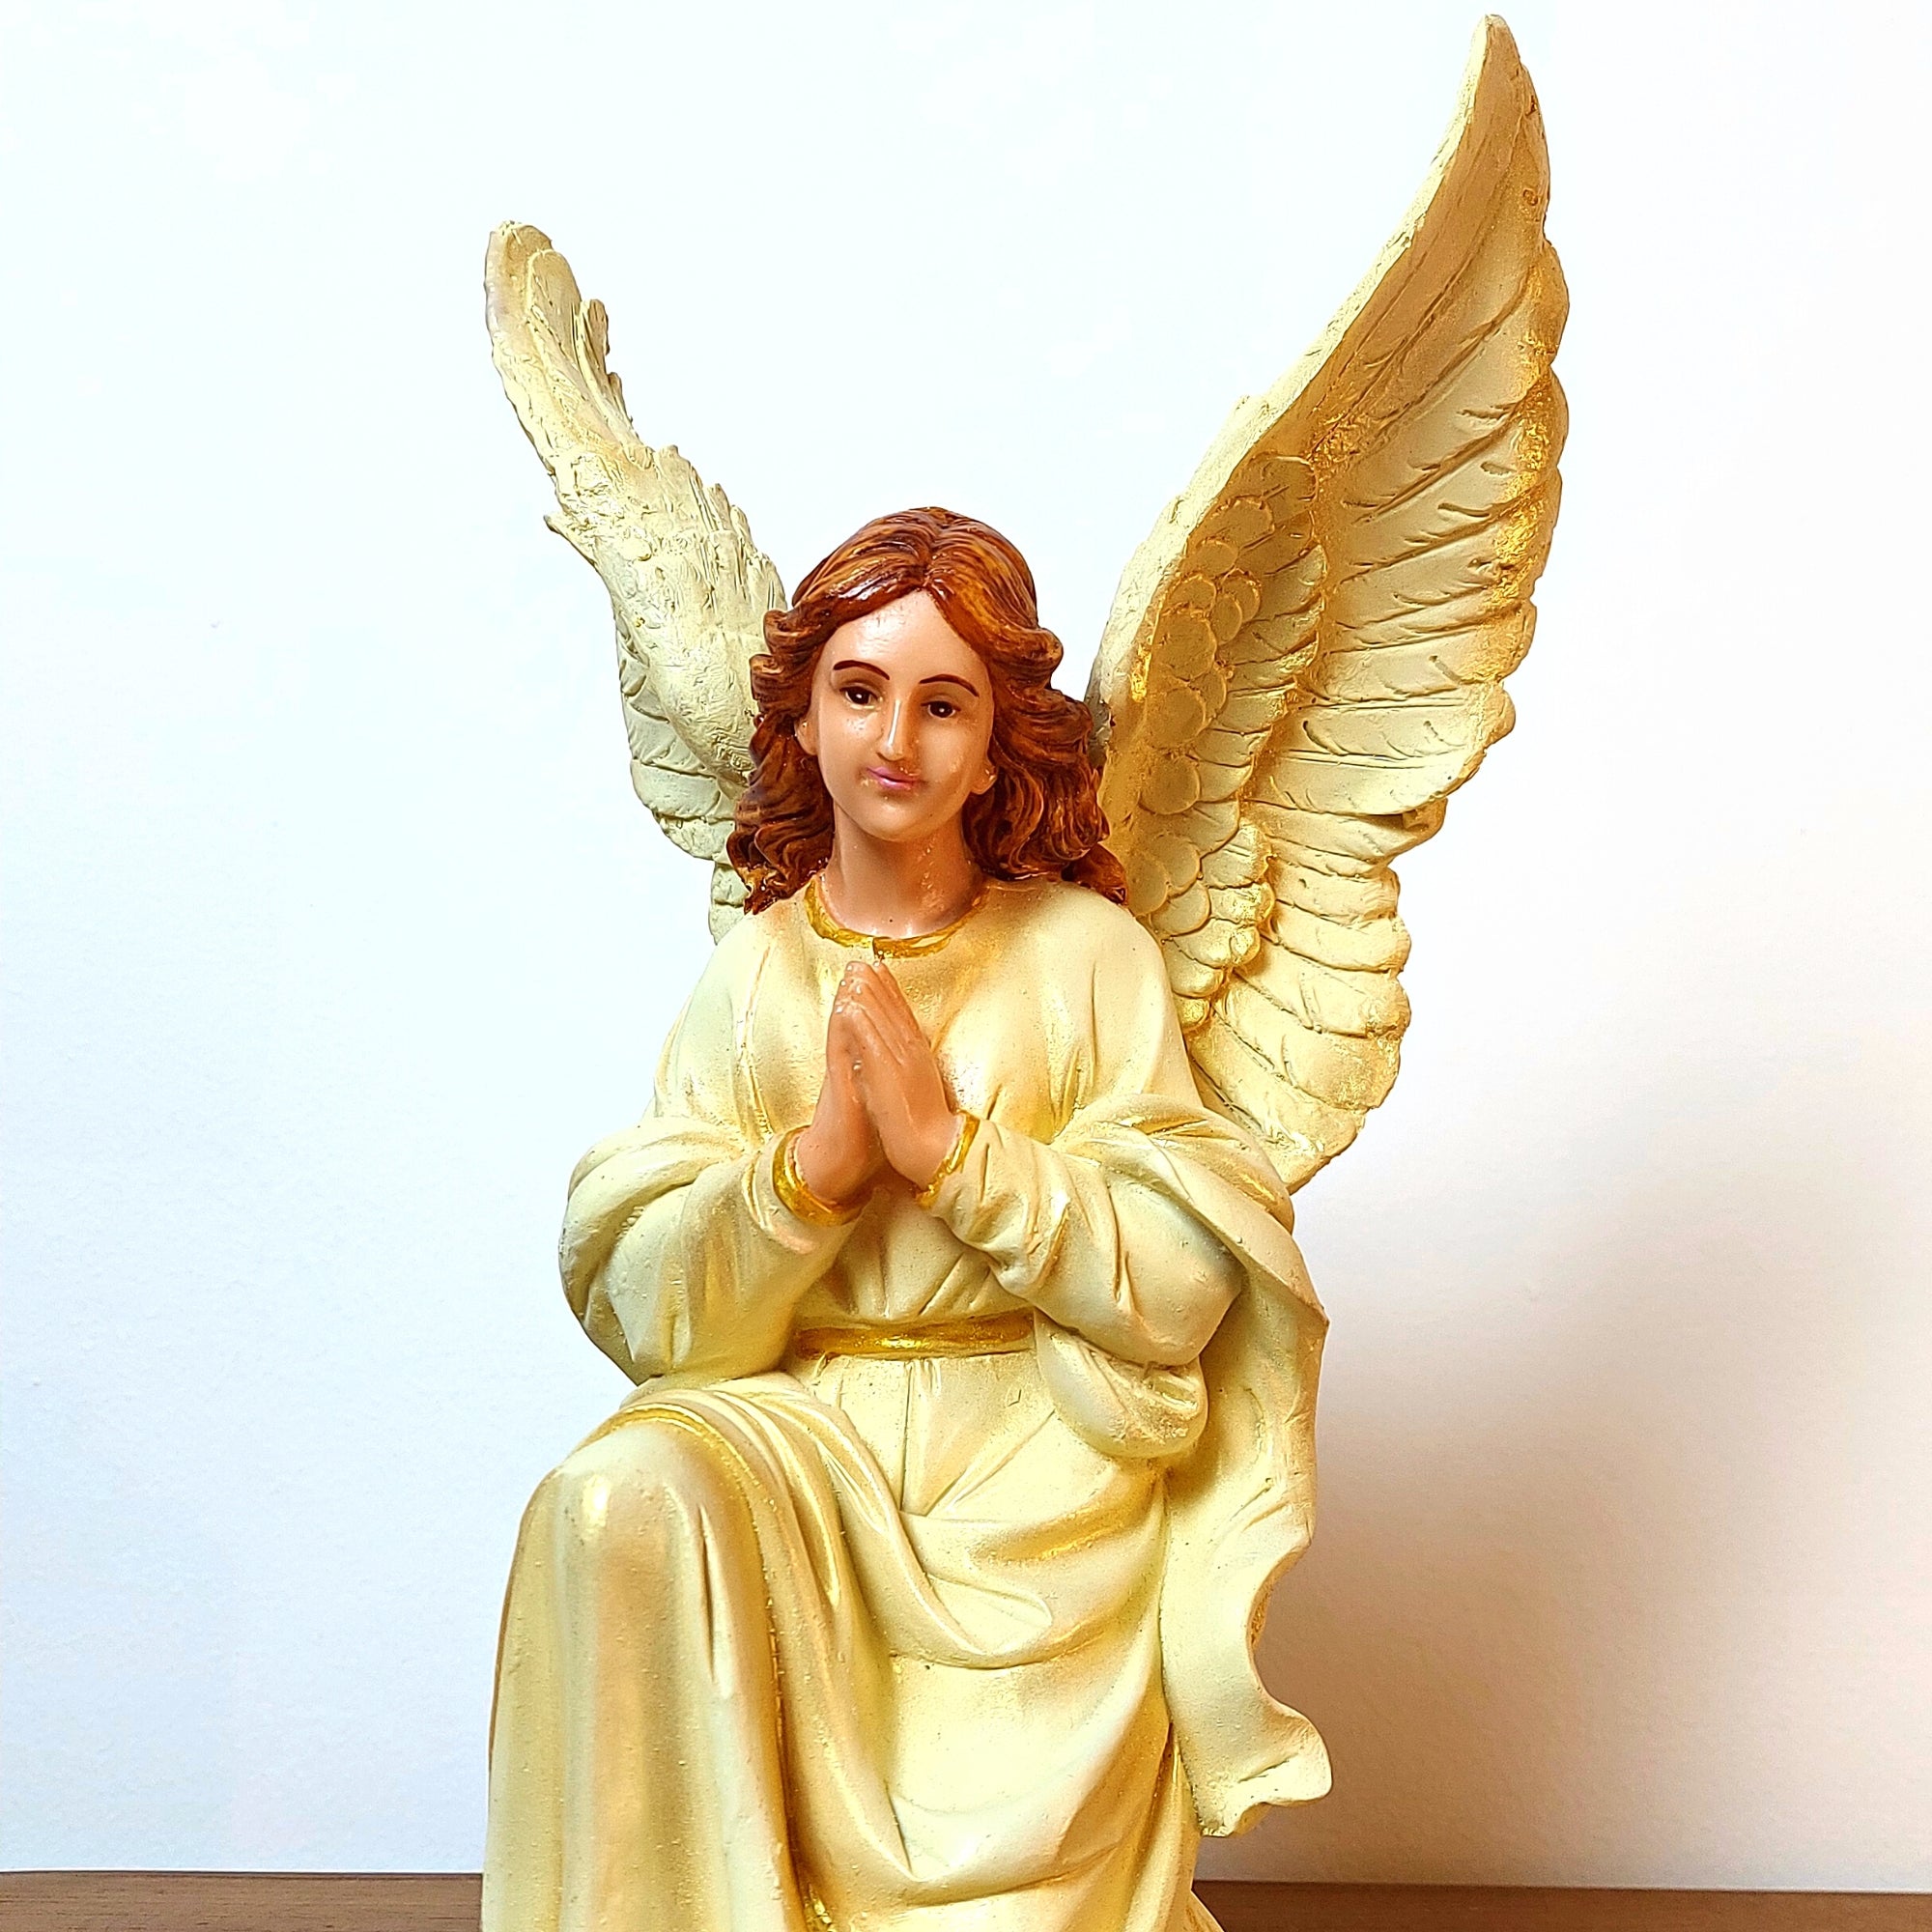 Kneeling Angel 12 Inch - A Heavenly Addition to Your Home | Living Words